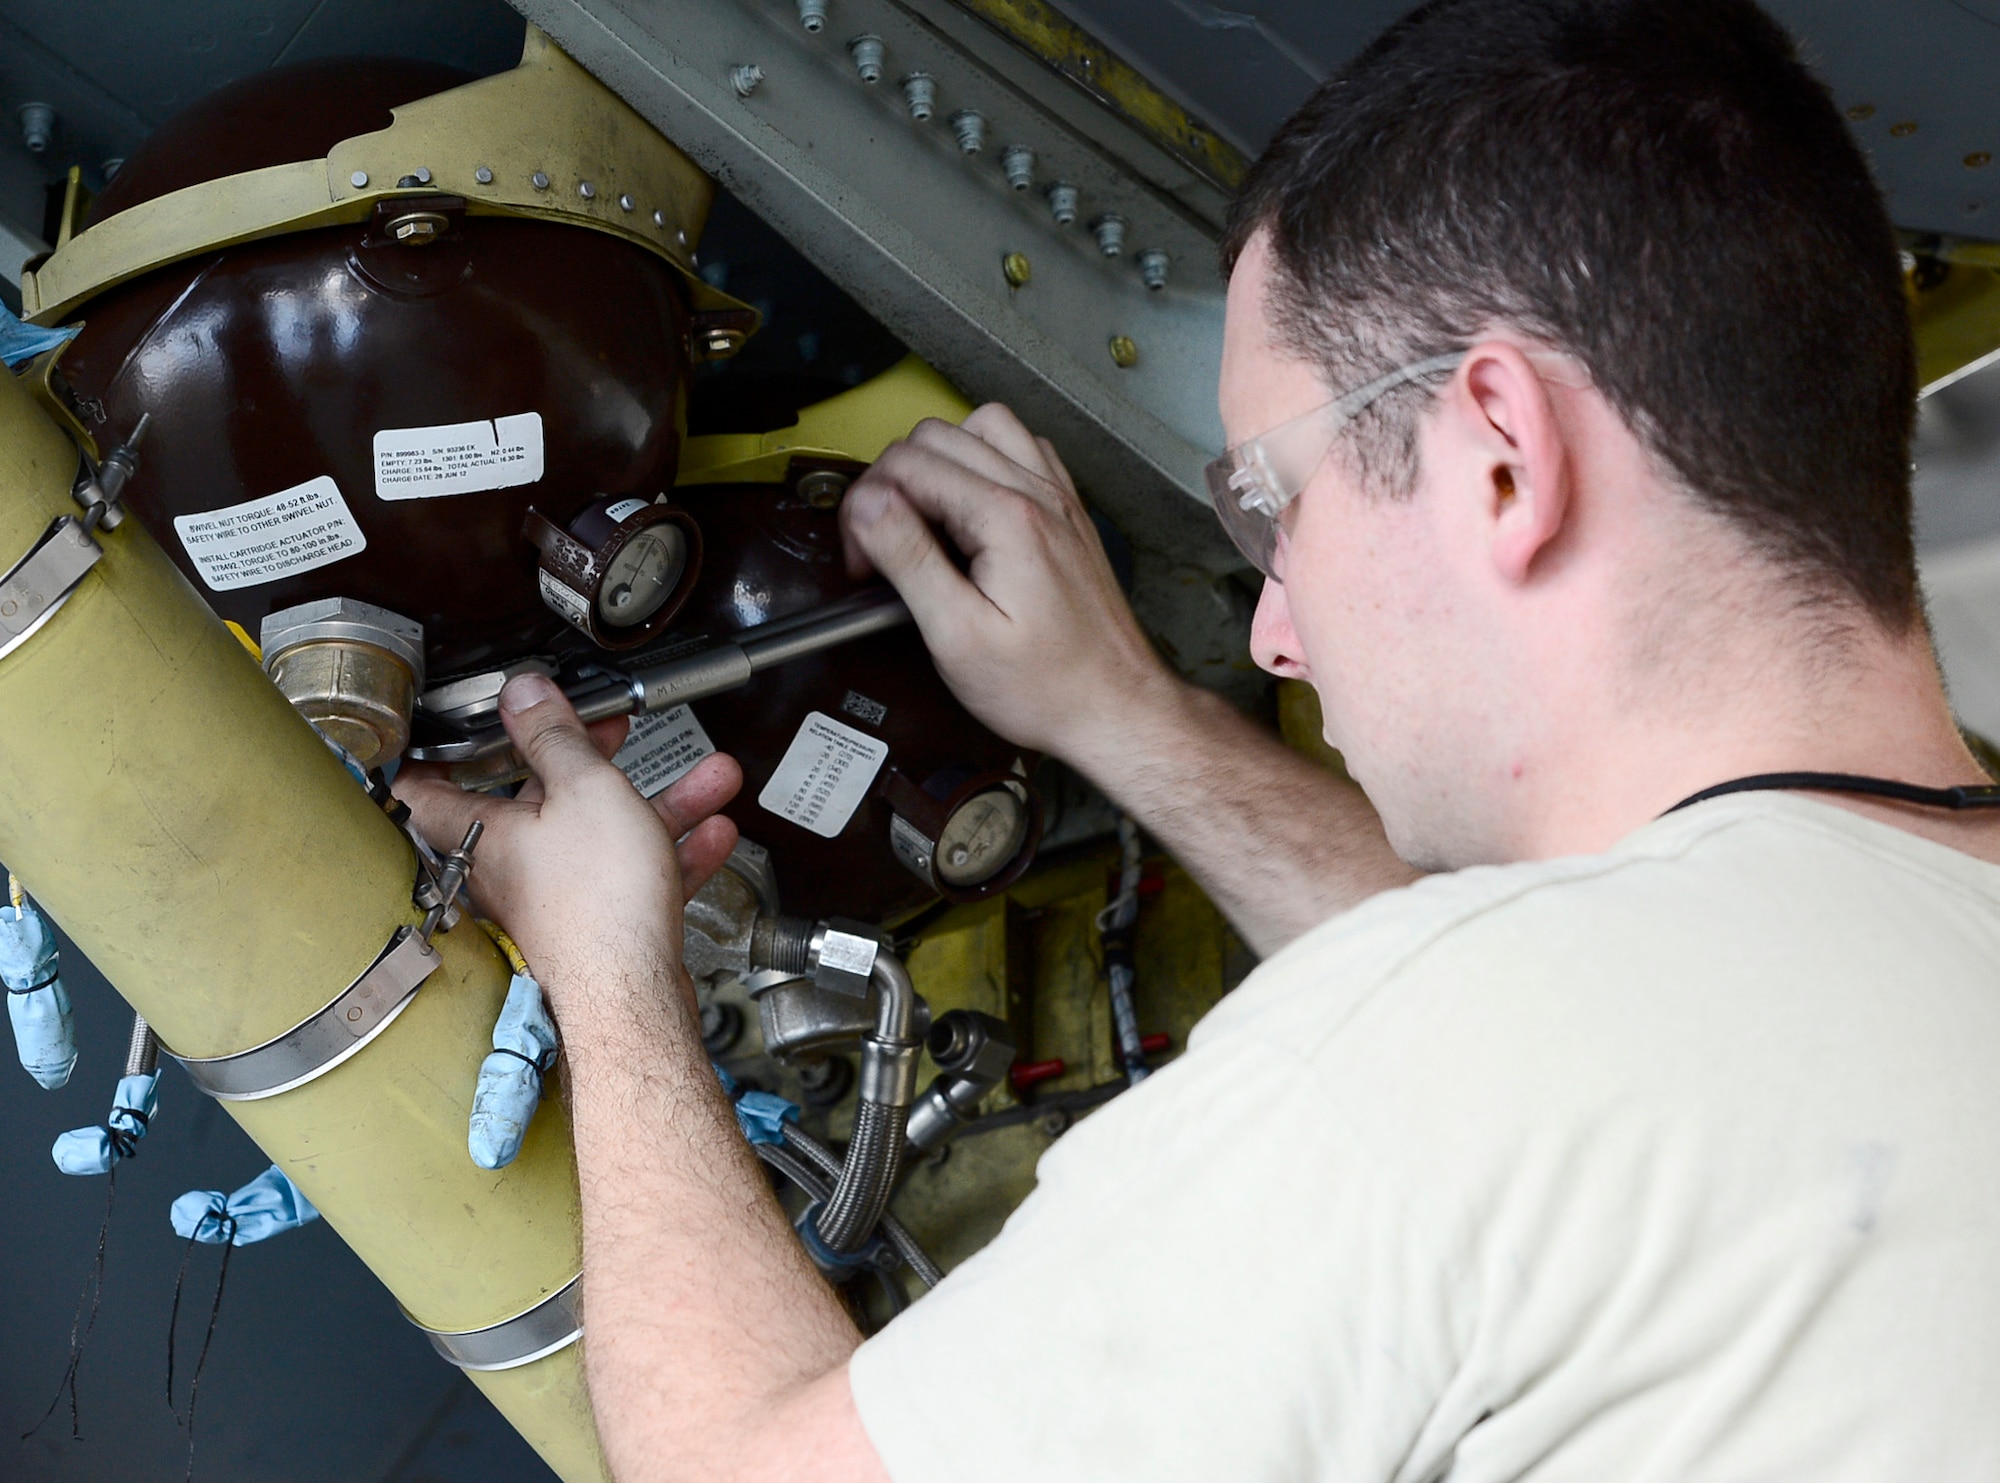 Senior Airman Andrew Mayer, an electrical and environmental technician assigned to the 6th Maintenance Squadron, installs an engine fire bottle during a hard landing inspection at MacDill Air Force Base, Fla., June 28, 2016. Airmen systematically dismantled the KC-135 Stratotanker from nose to tail to ensure the aircraft was mission ready. (U.S. Air Force photo by Senior Airman Tori Schultz)